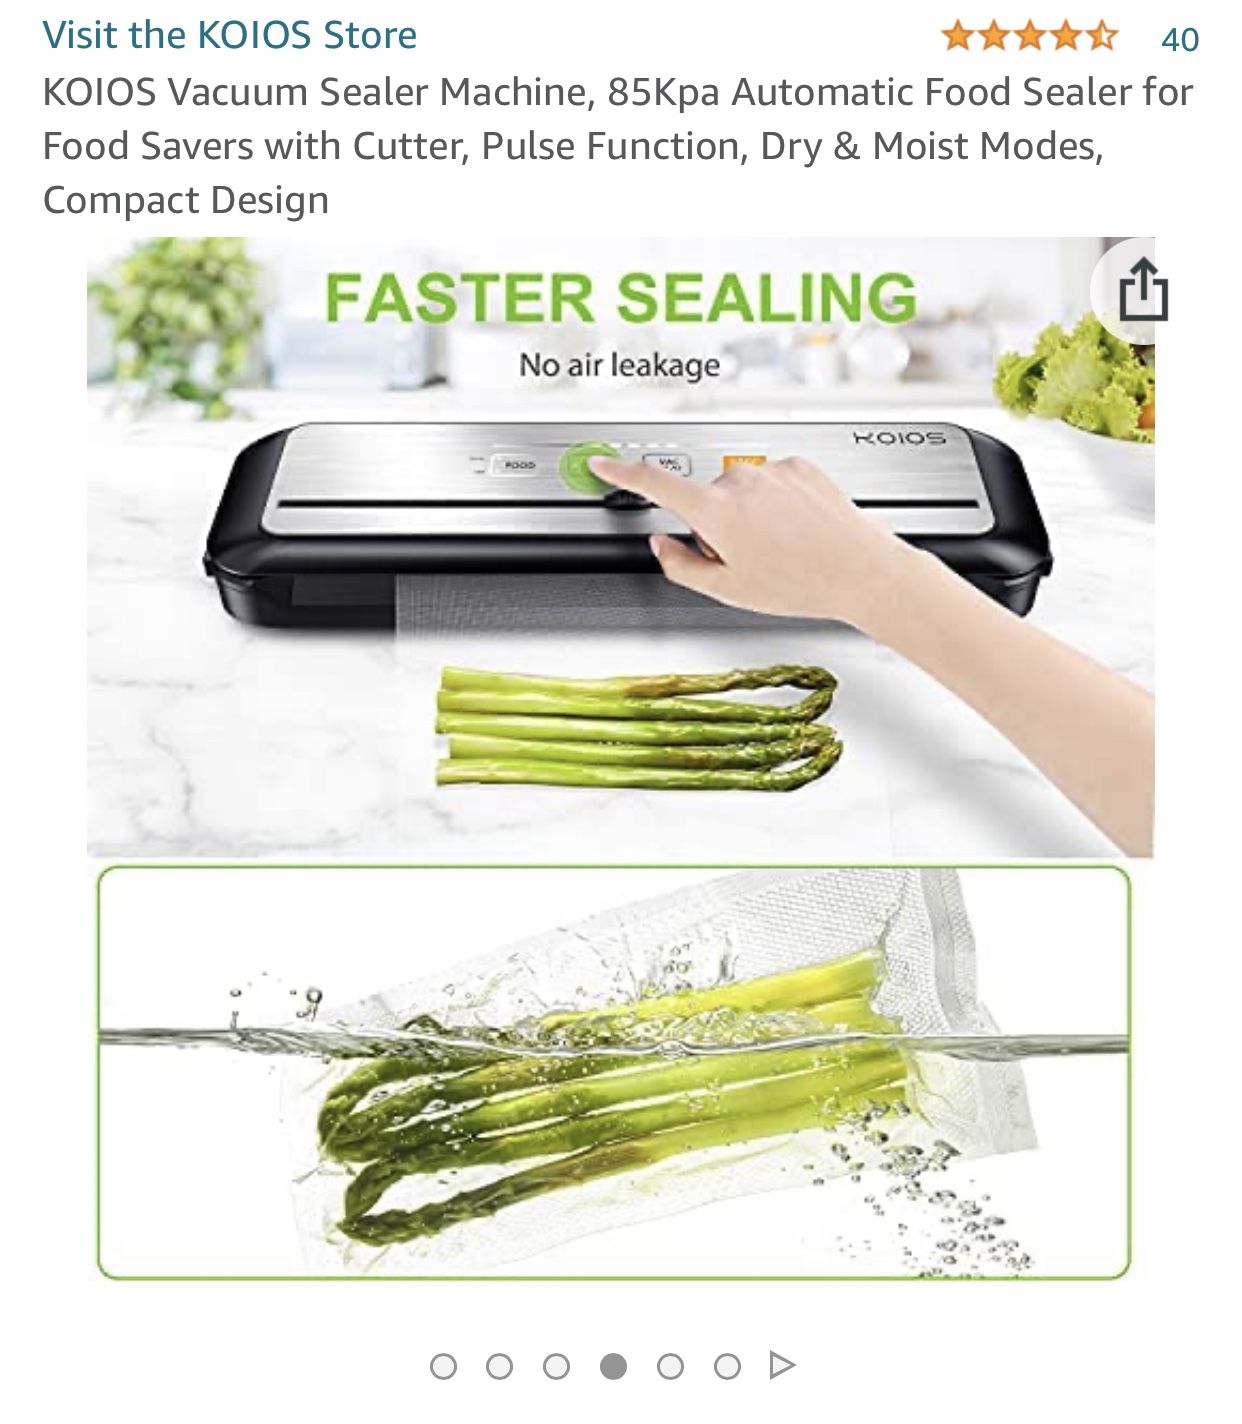  Vacuum Sealer Machine, 85Kpa Automatic Food Sealer for Food Savers with Cutter, Pulse Function, Dry & Moist Modes, Compact Design